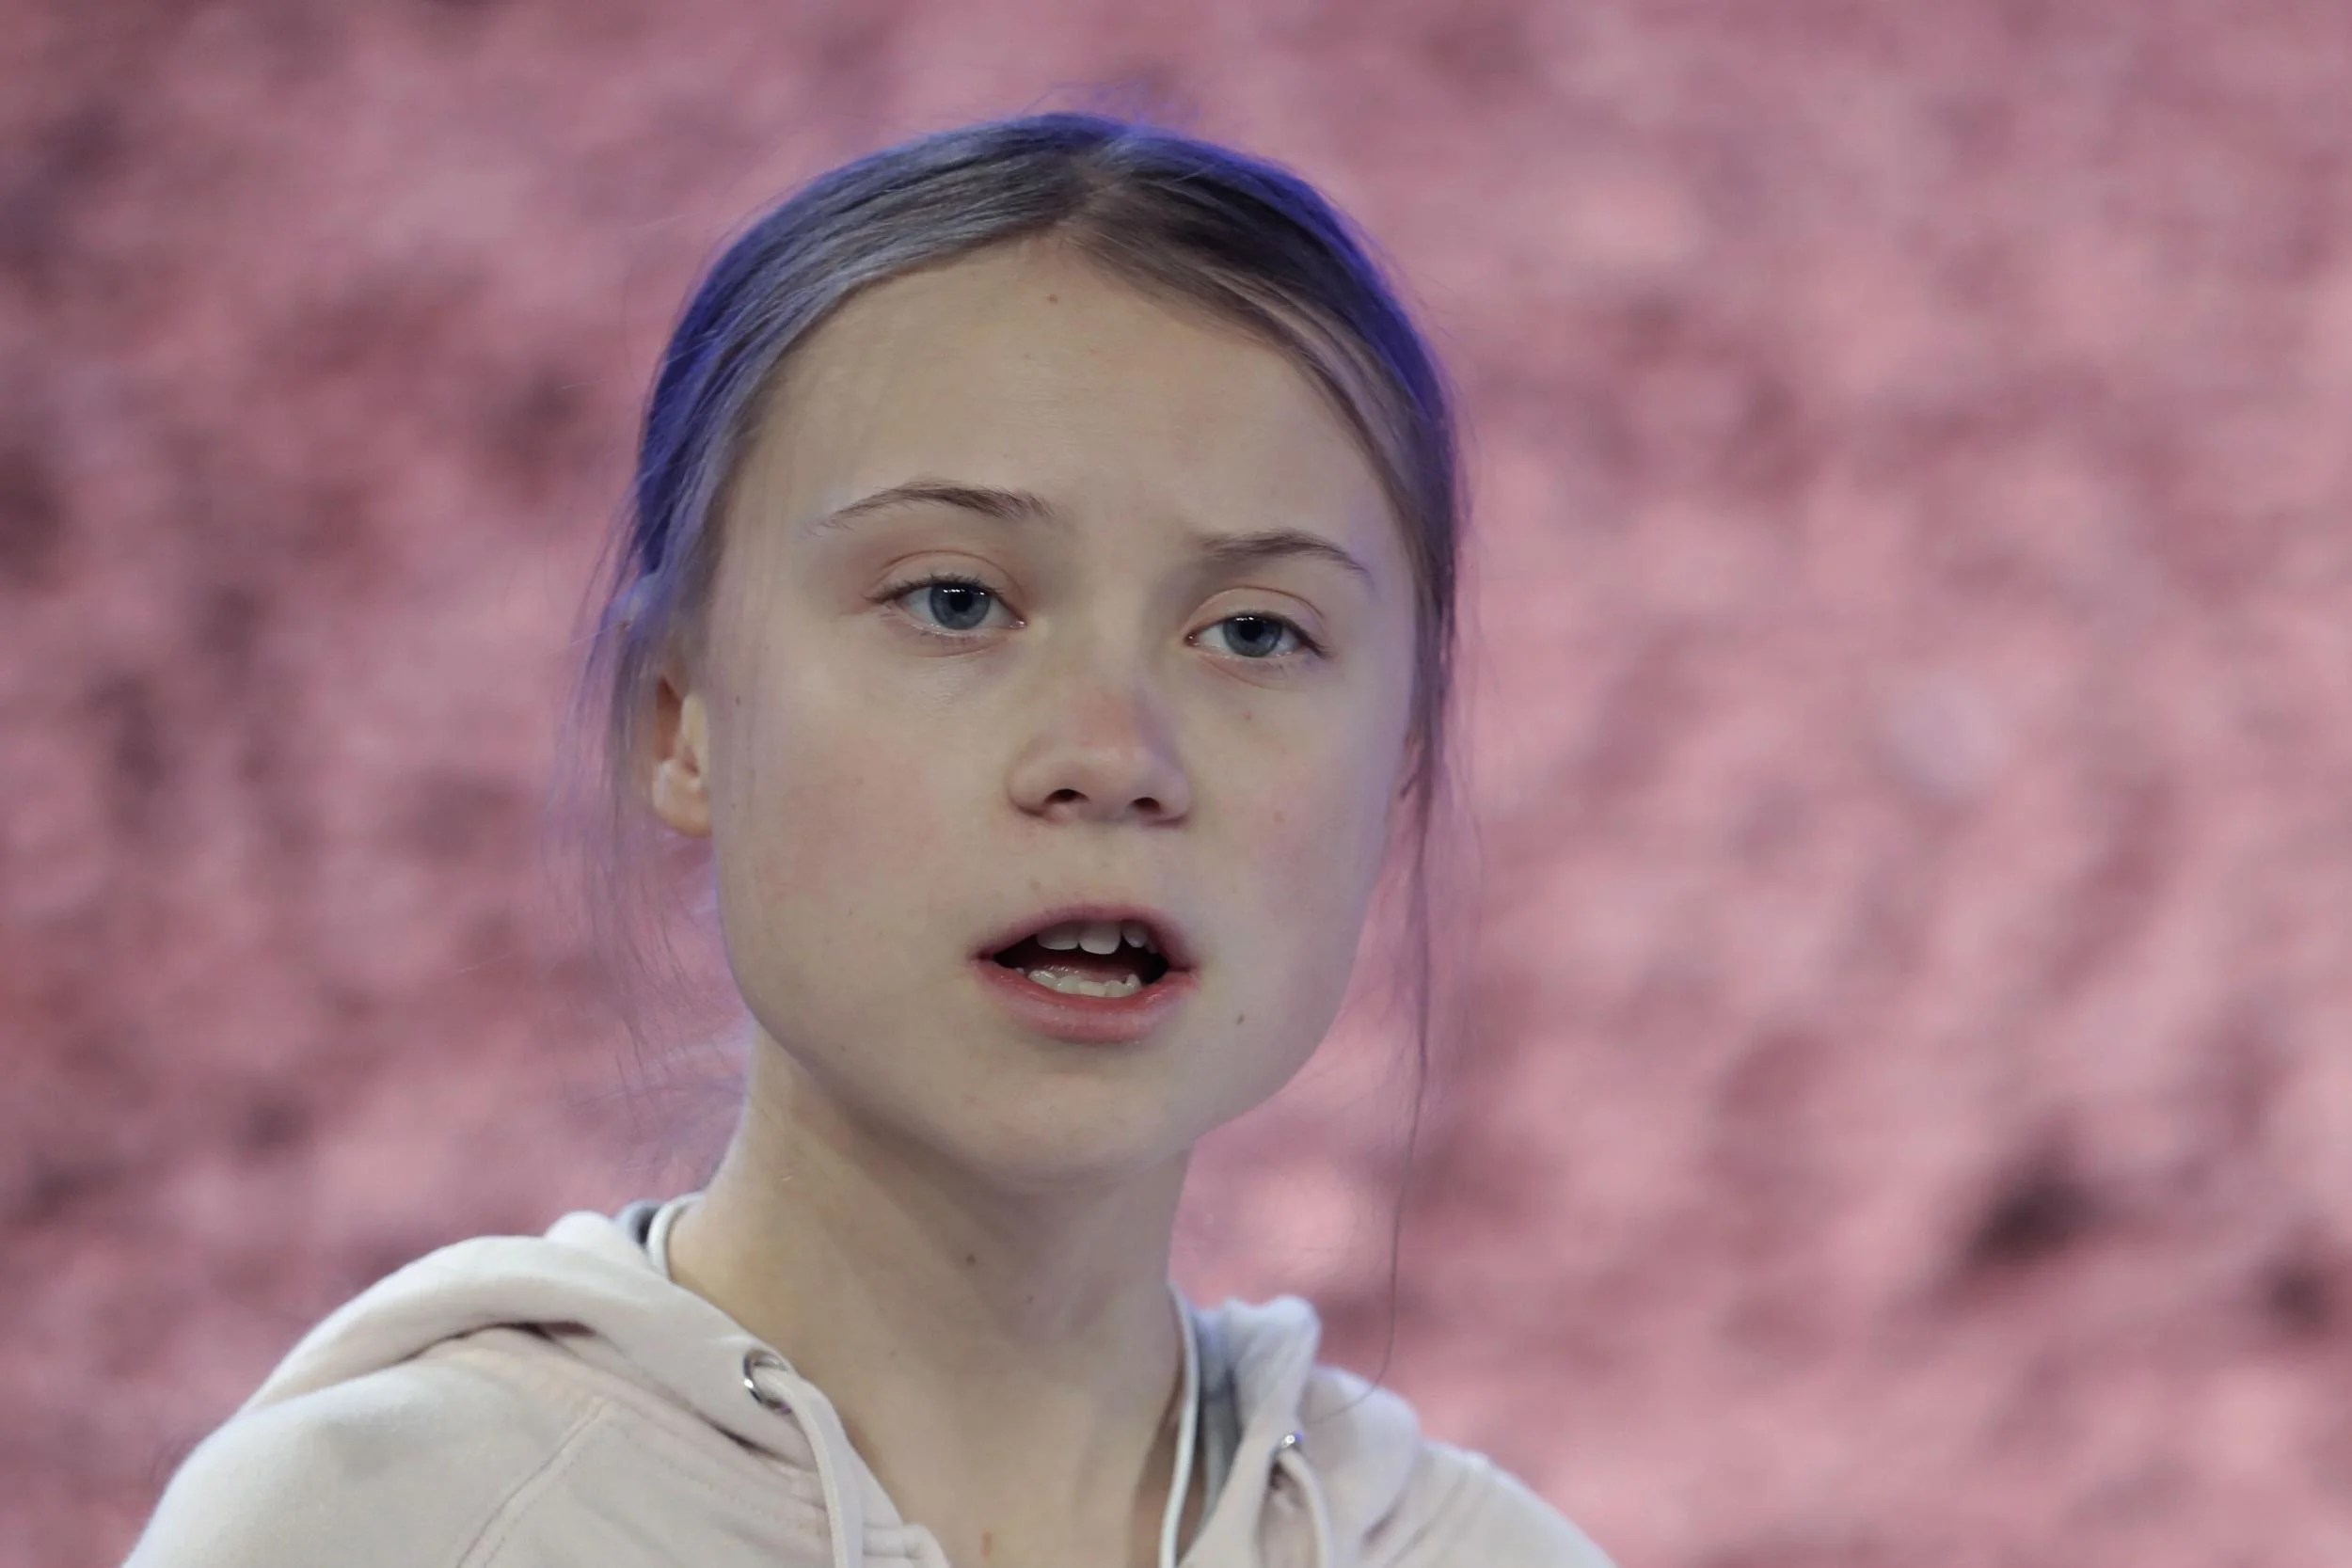 Greta Thunberg blasts Trump over climate change stance ‘Your inaction